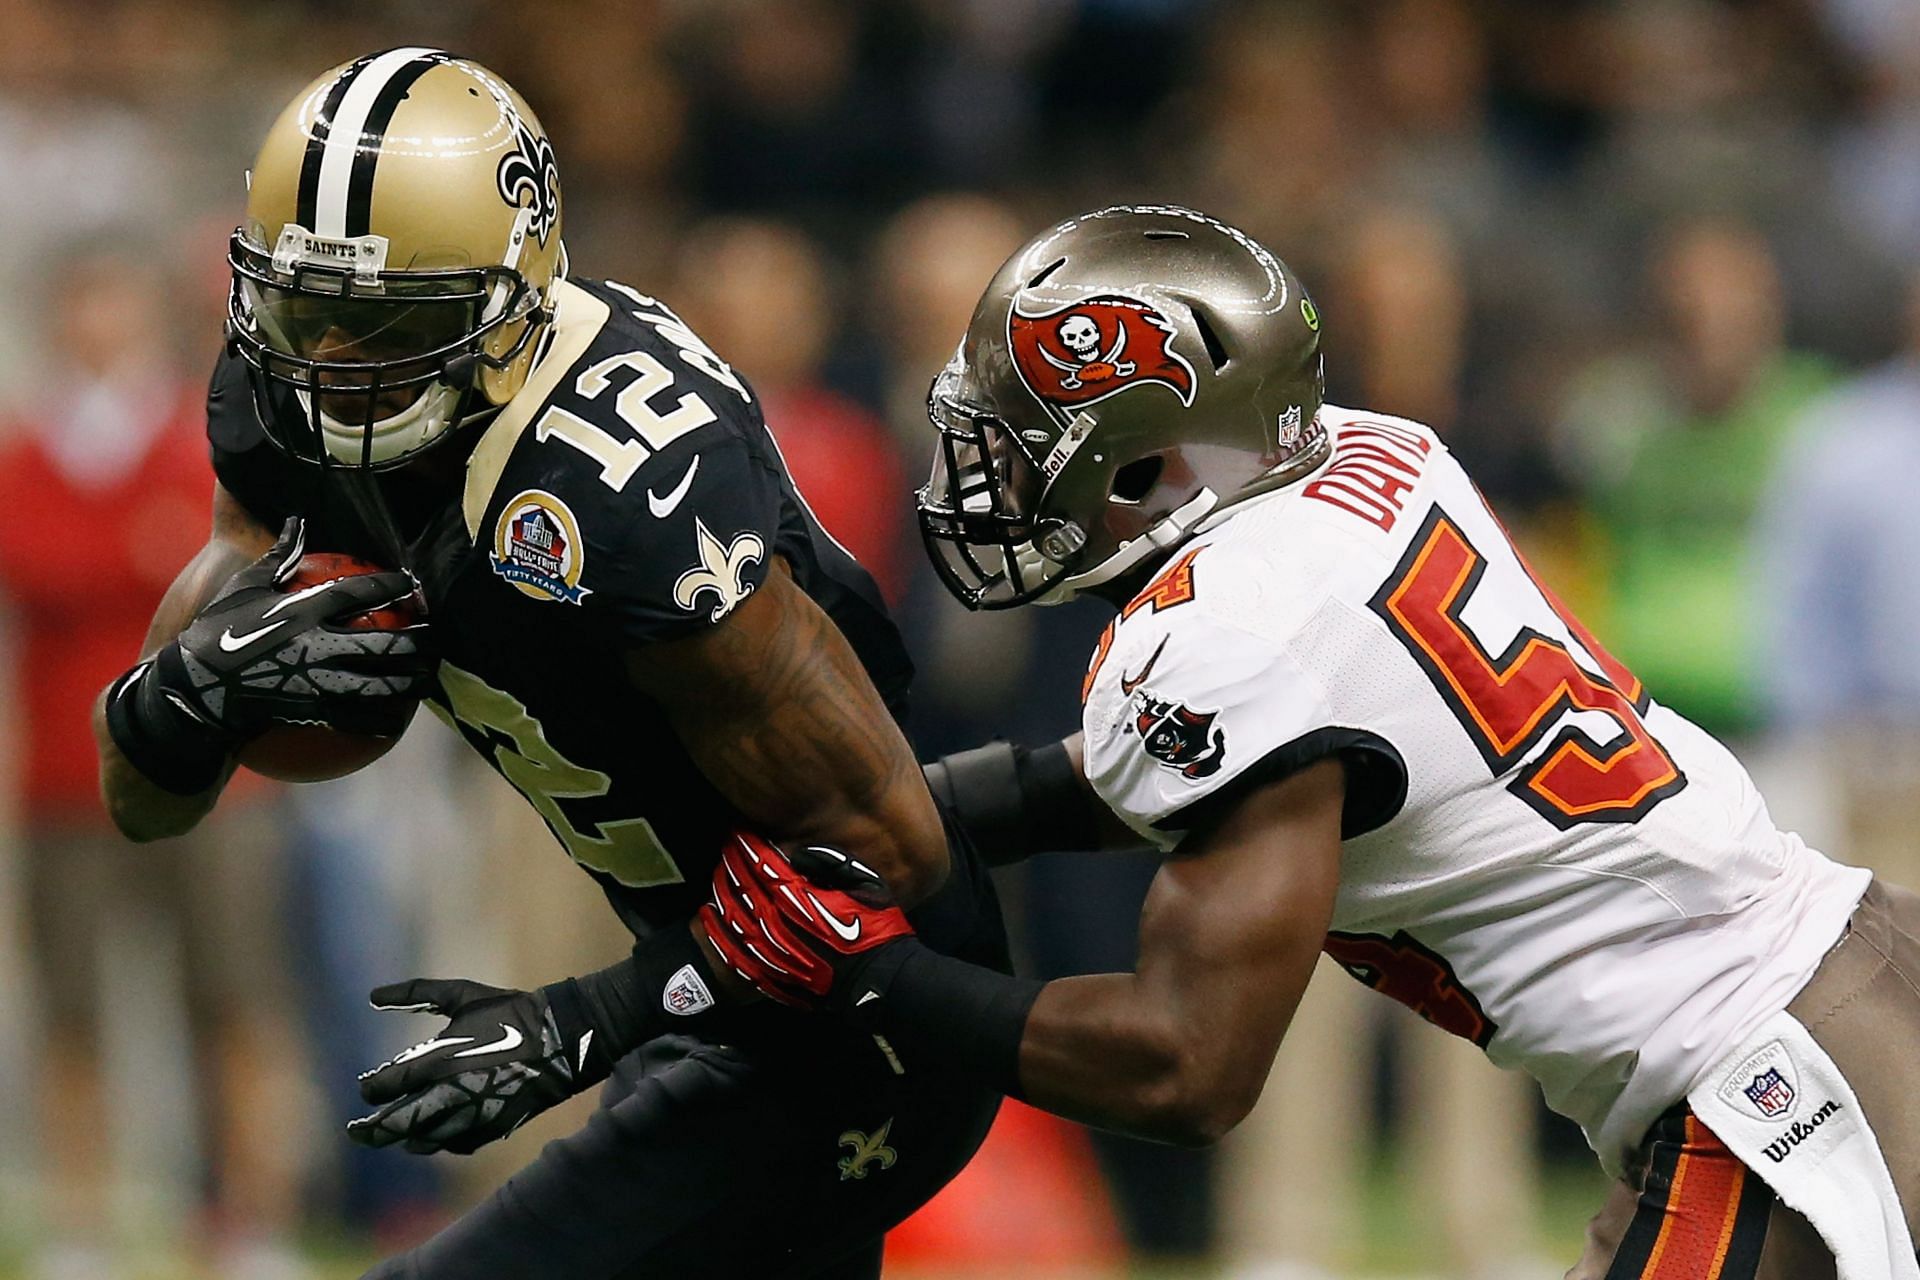 Marques Colston in action for the New Orleans Saints